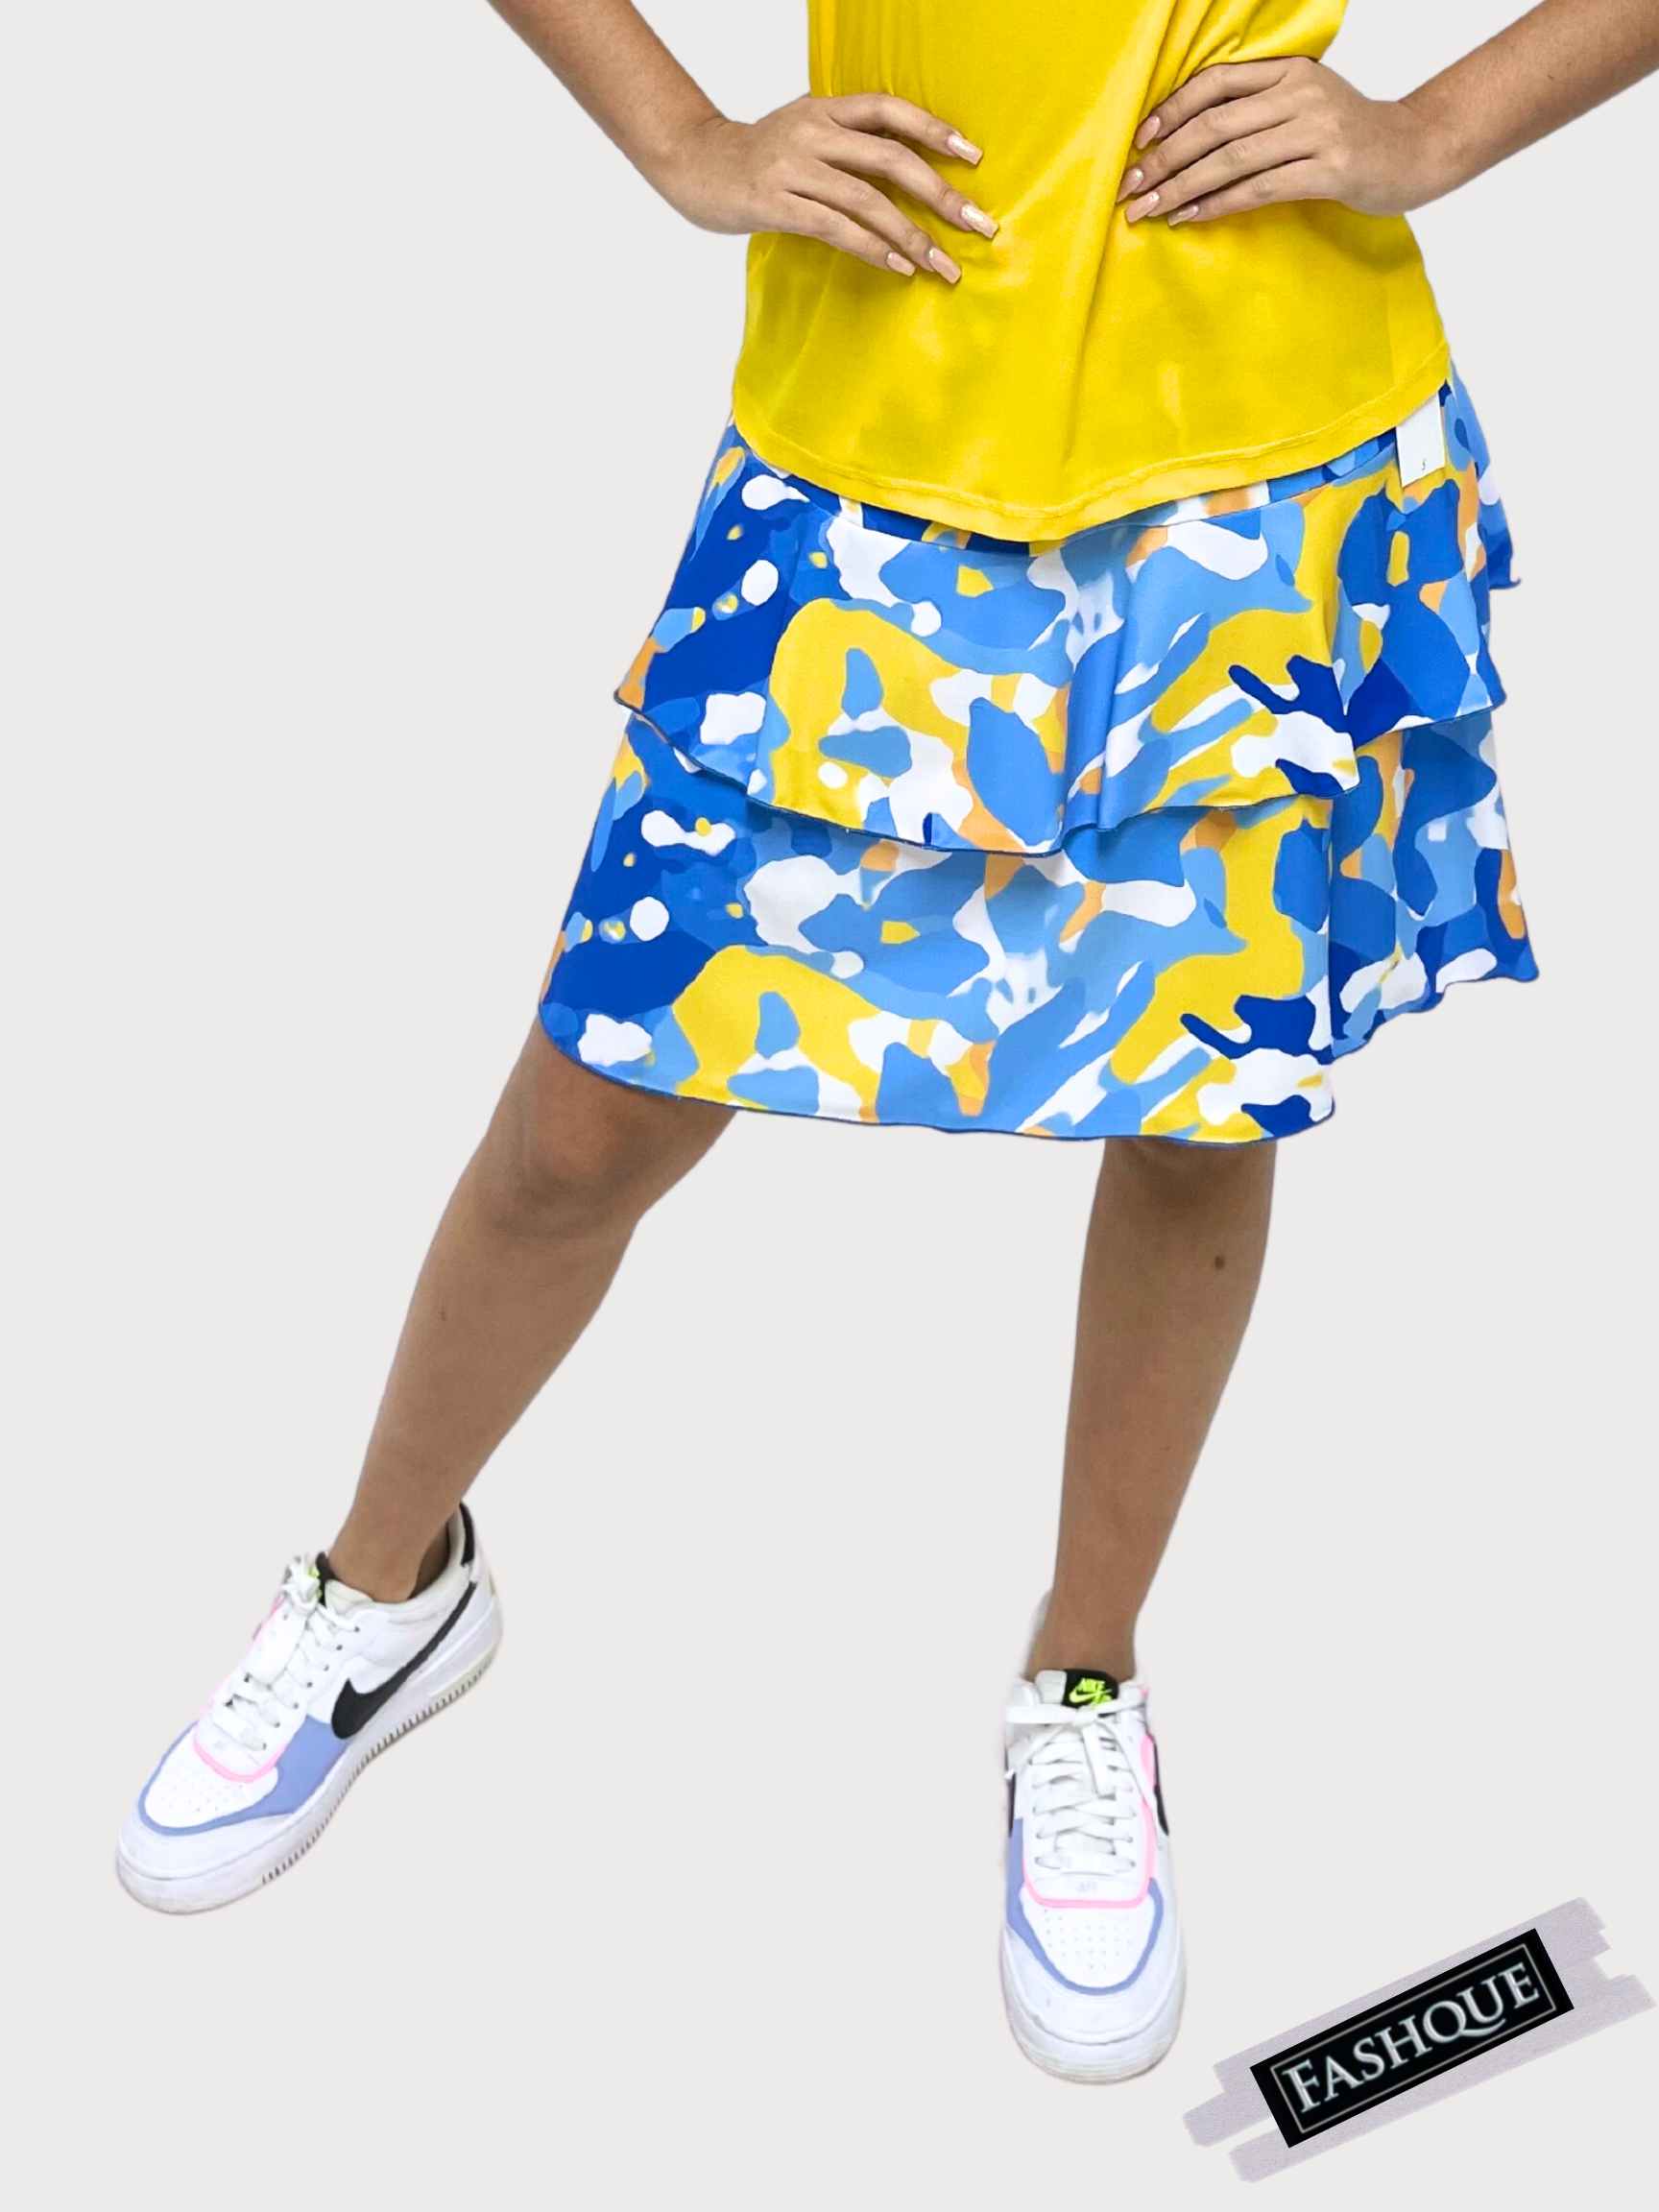 FASHQUE - 3 Tier DIGITAL PRINT SKORT with the Ruffle in the center - SH2001